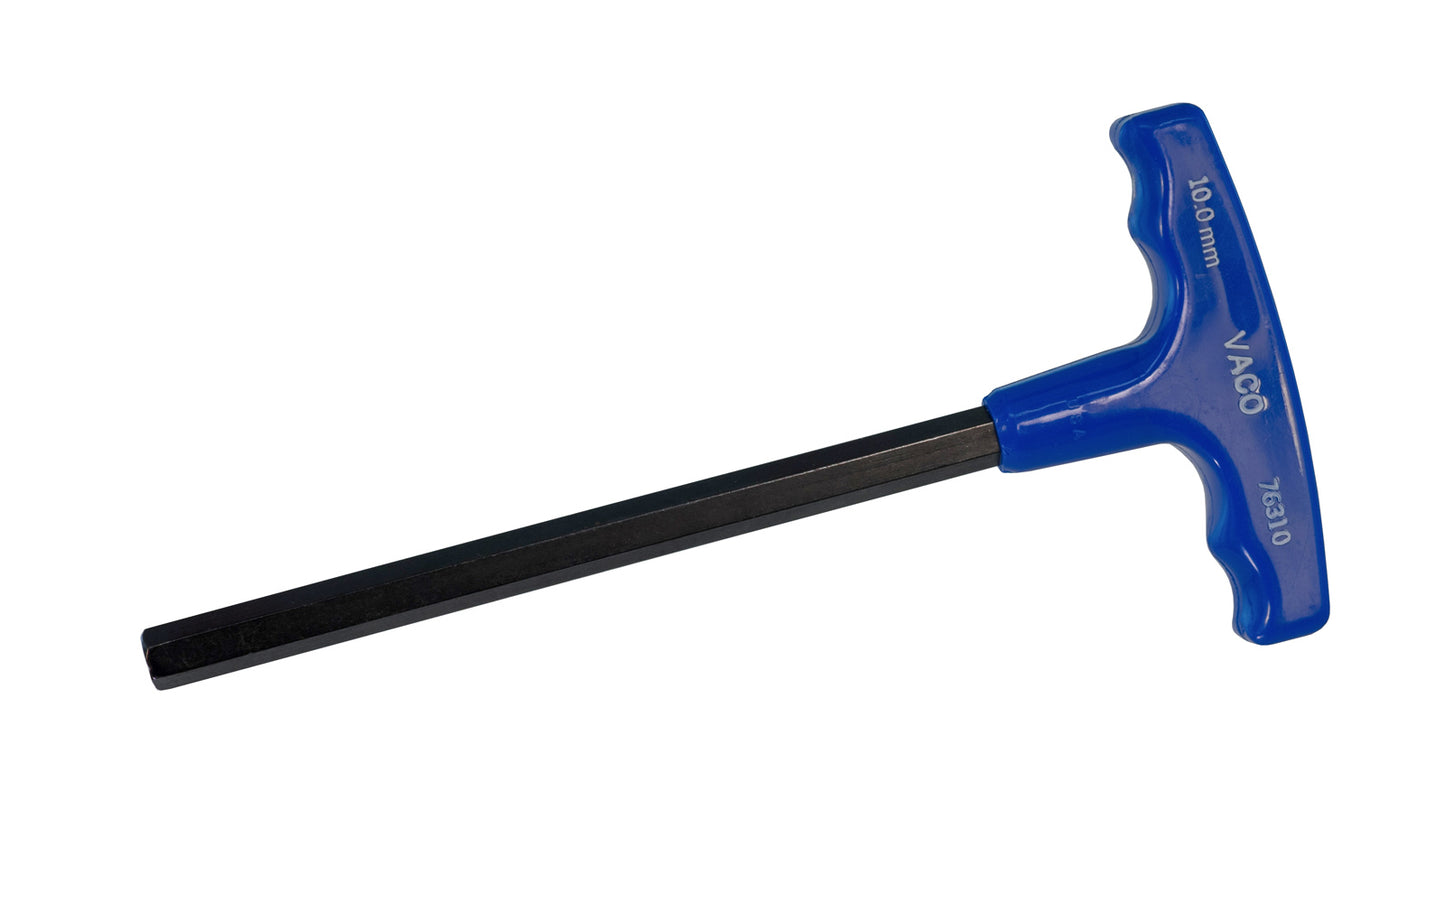 Vaco 10 mm Metric Hex T-Key. Industrial quality Tee handle hex key wrench with vinyl handle. Model 76310.   Made in USA.